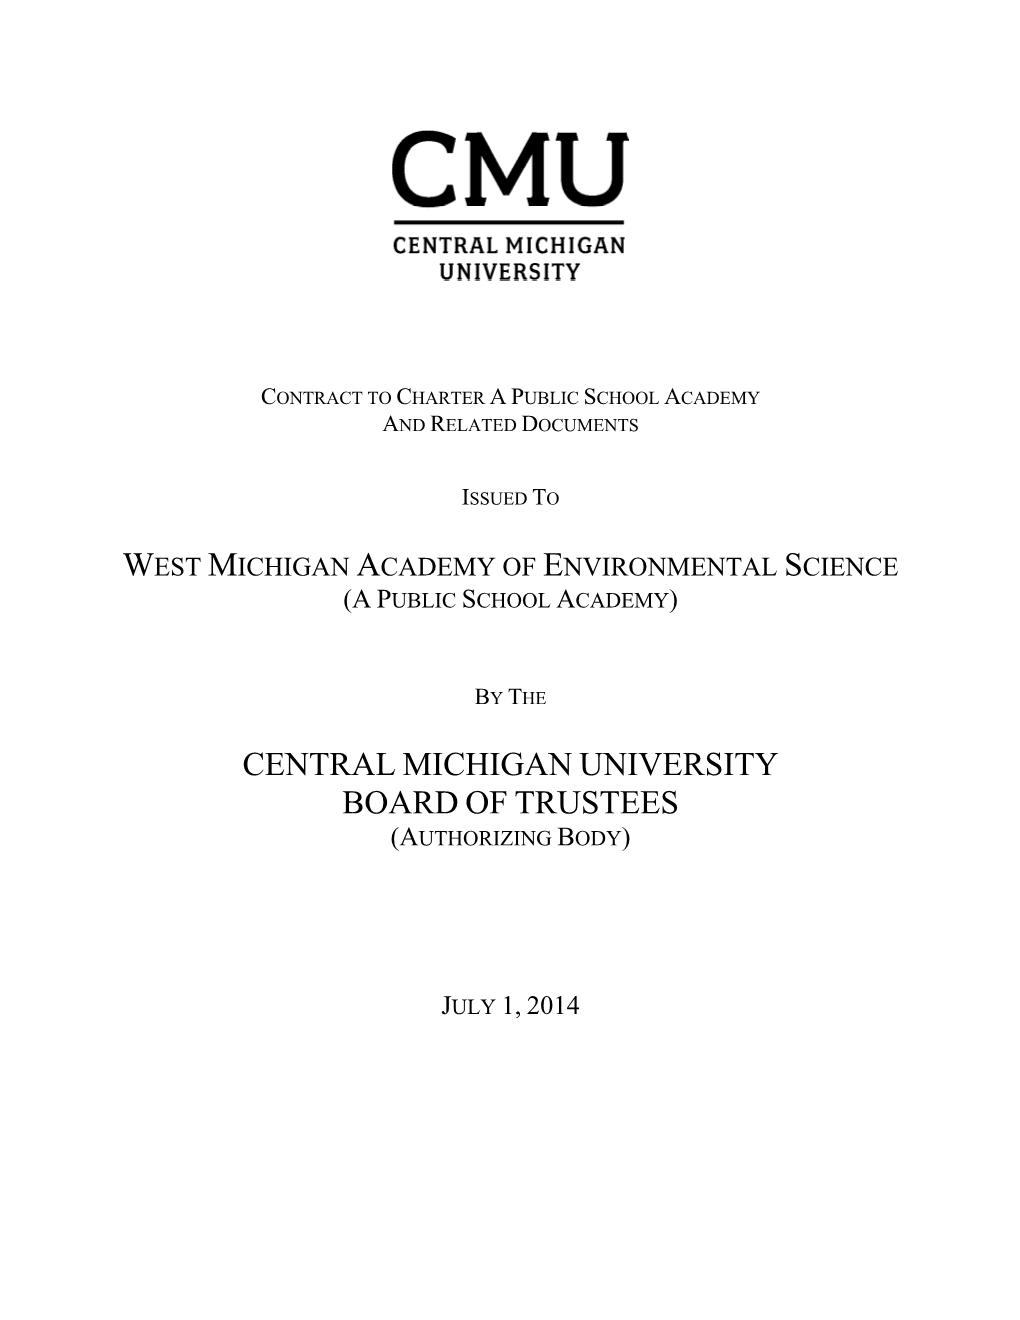 Central Michigan University Board of Trustees (Authorizing Body)